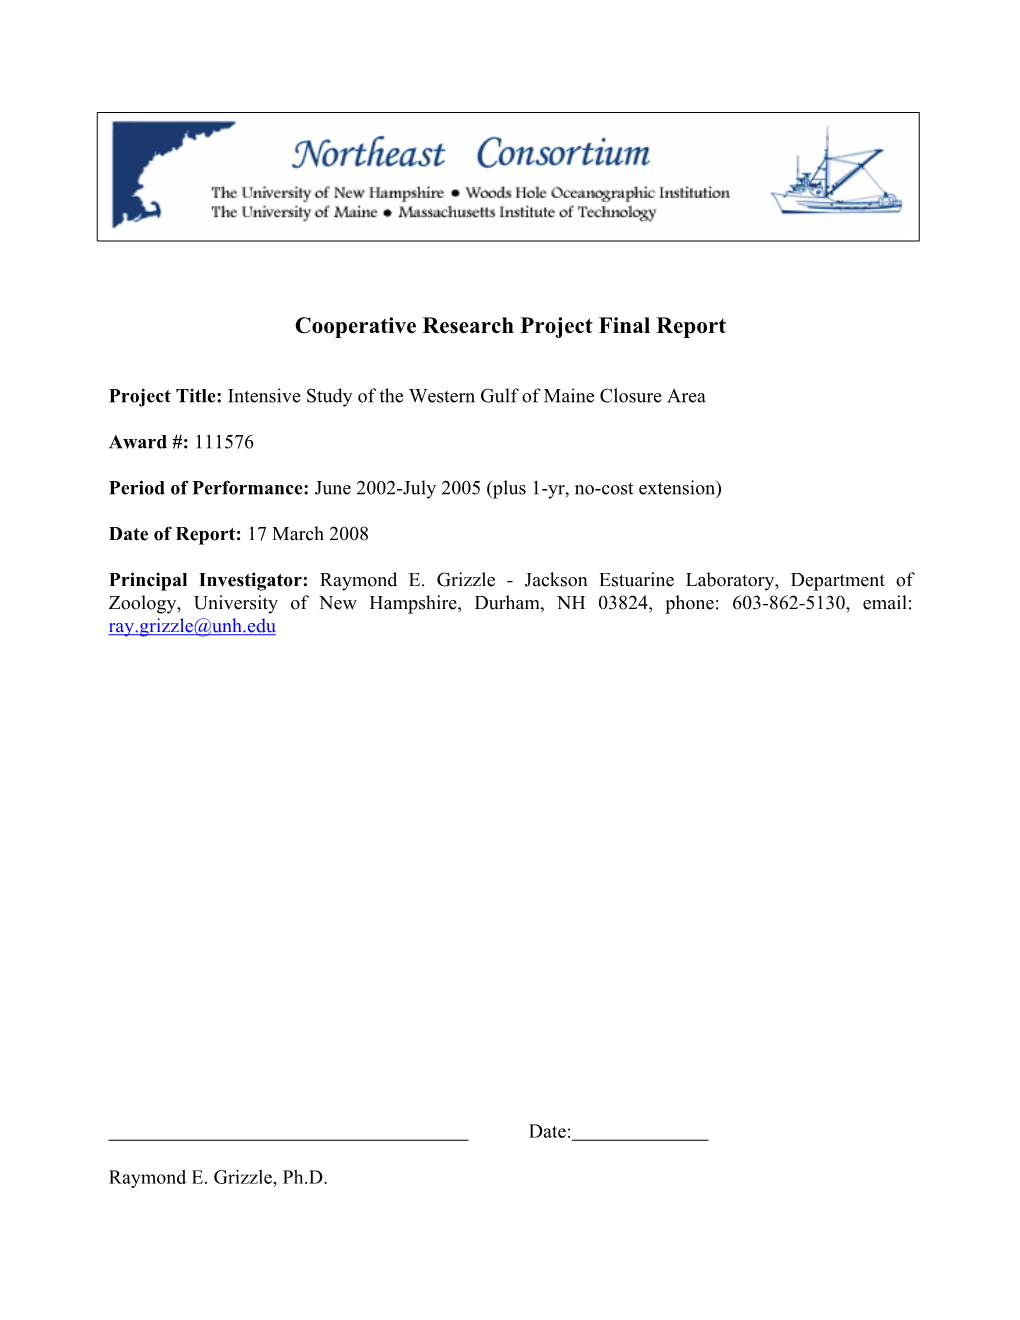 Cooperative Research Project Final Report